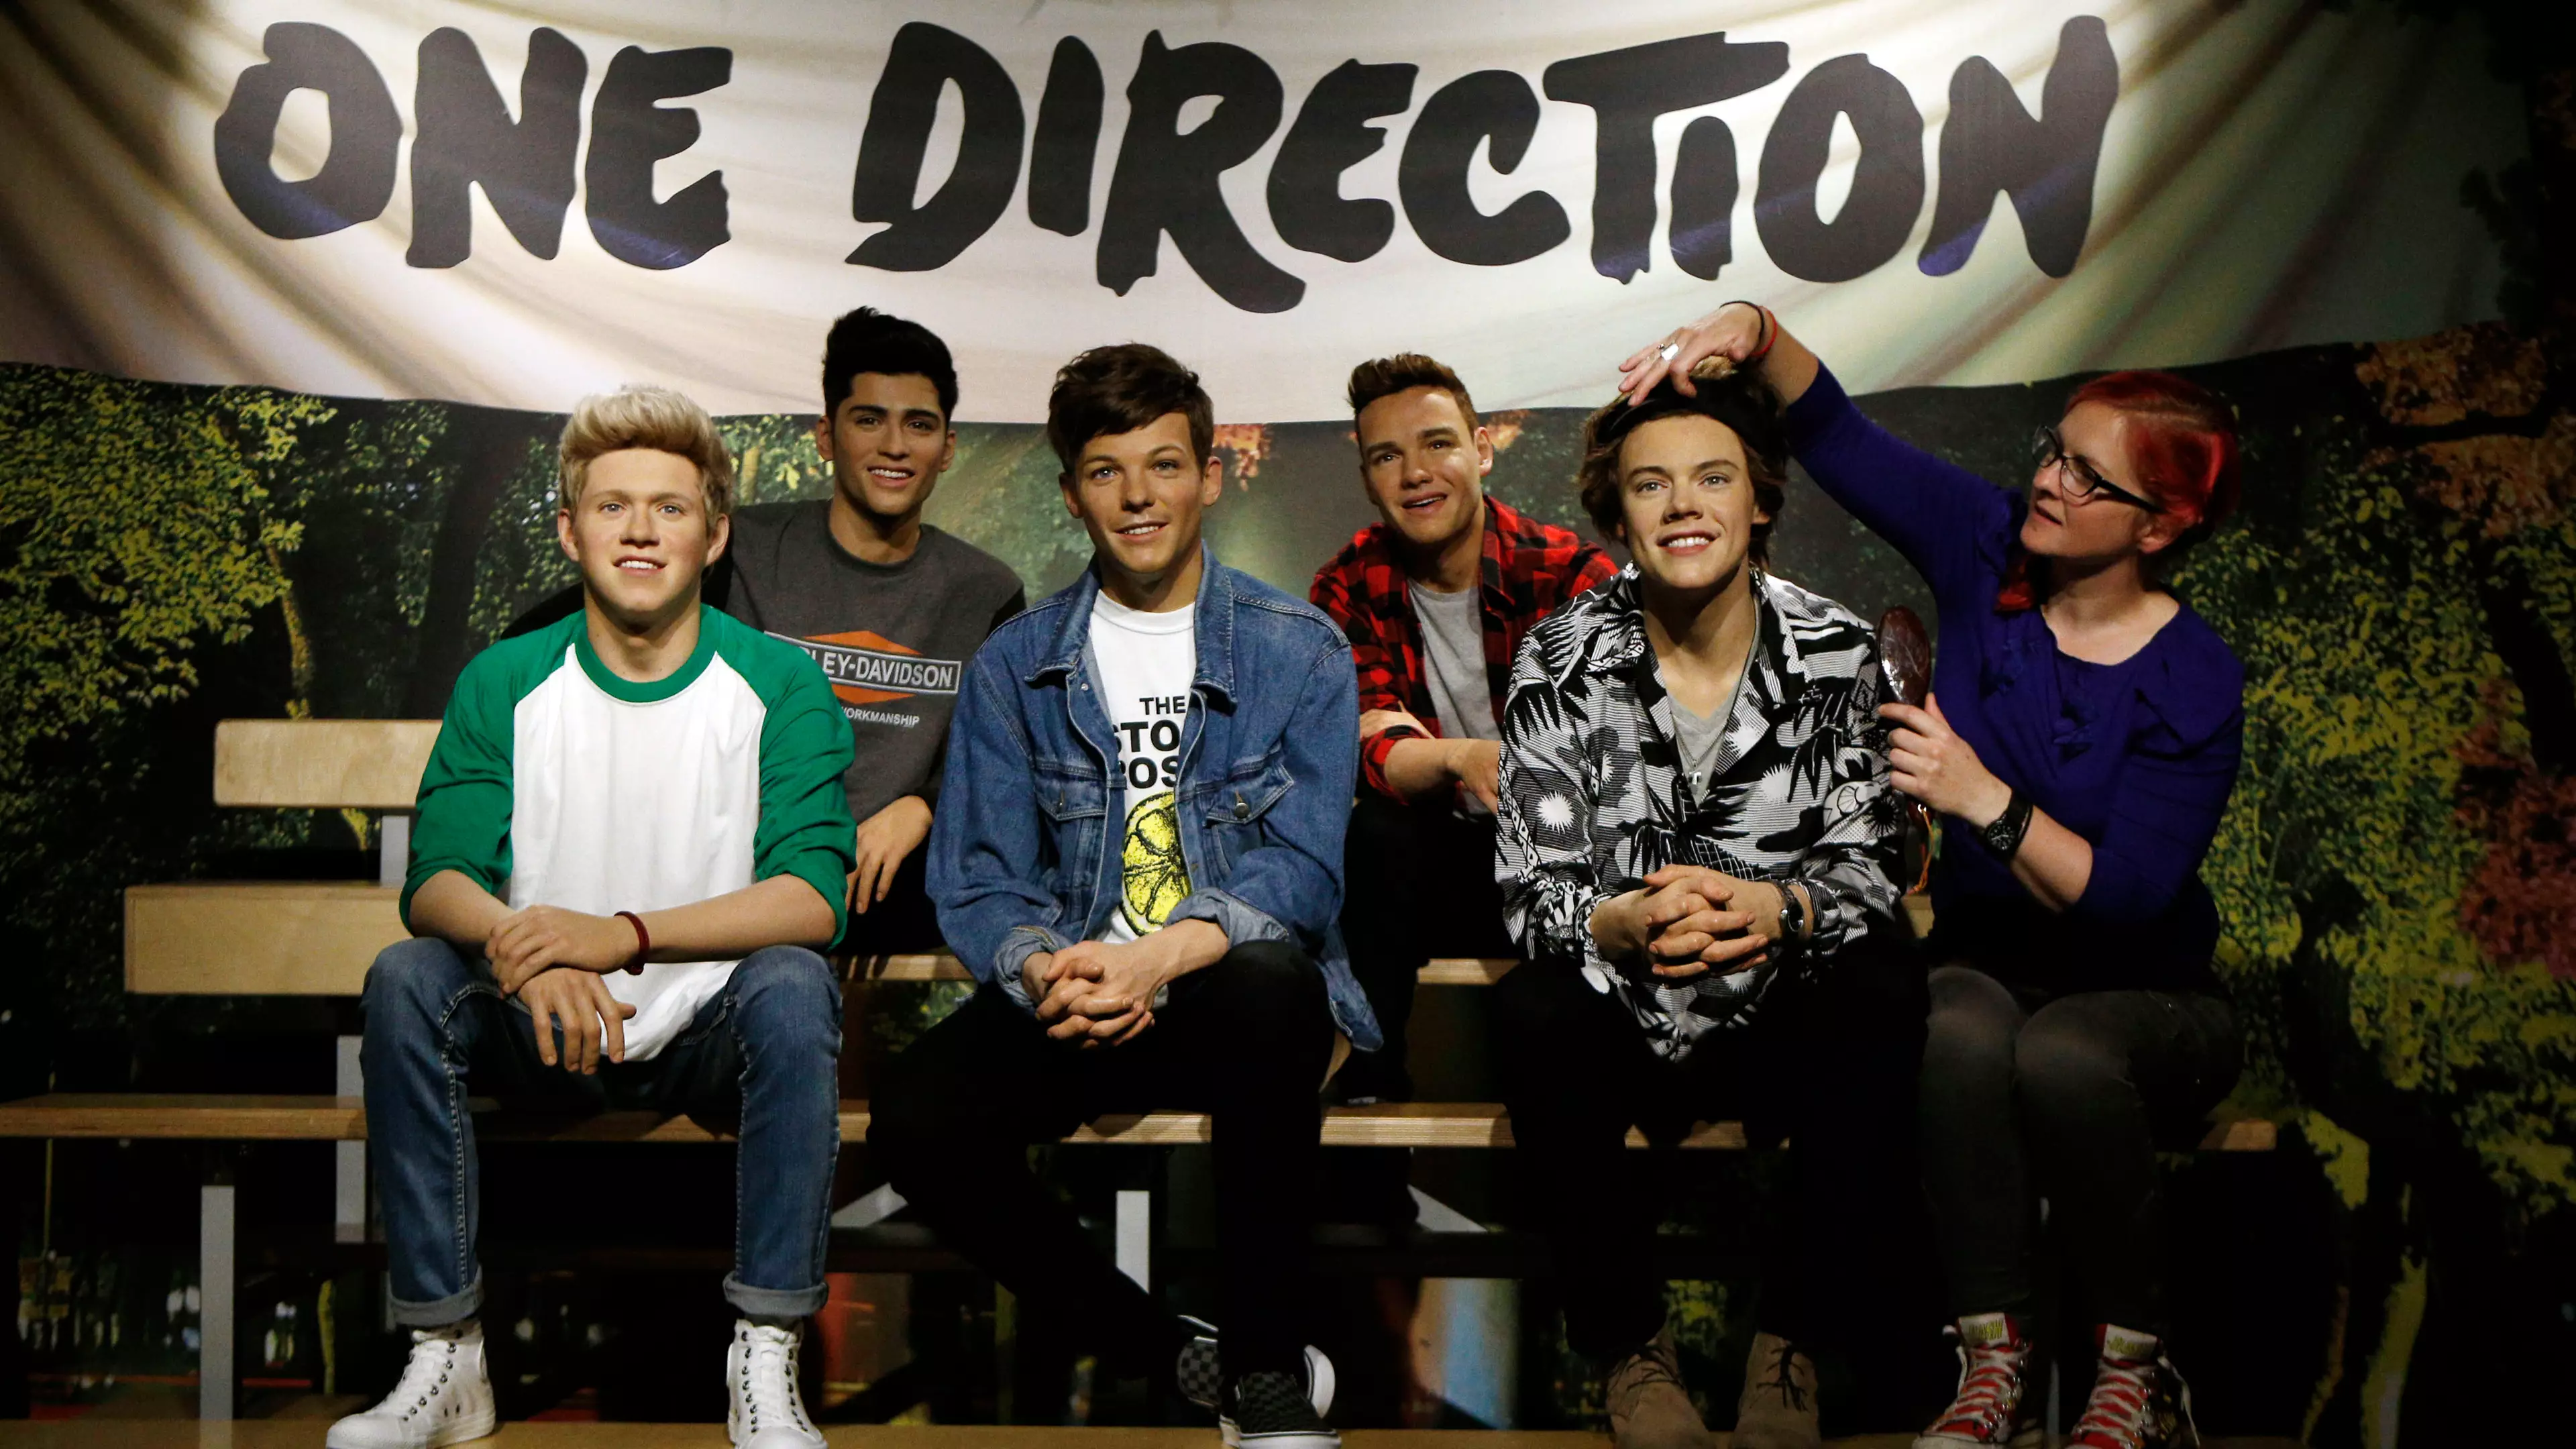 Madame Tussauds London Removes One Direction Waxworks 